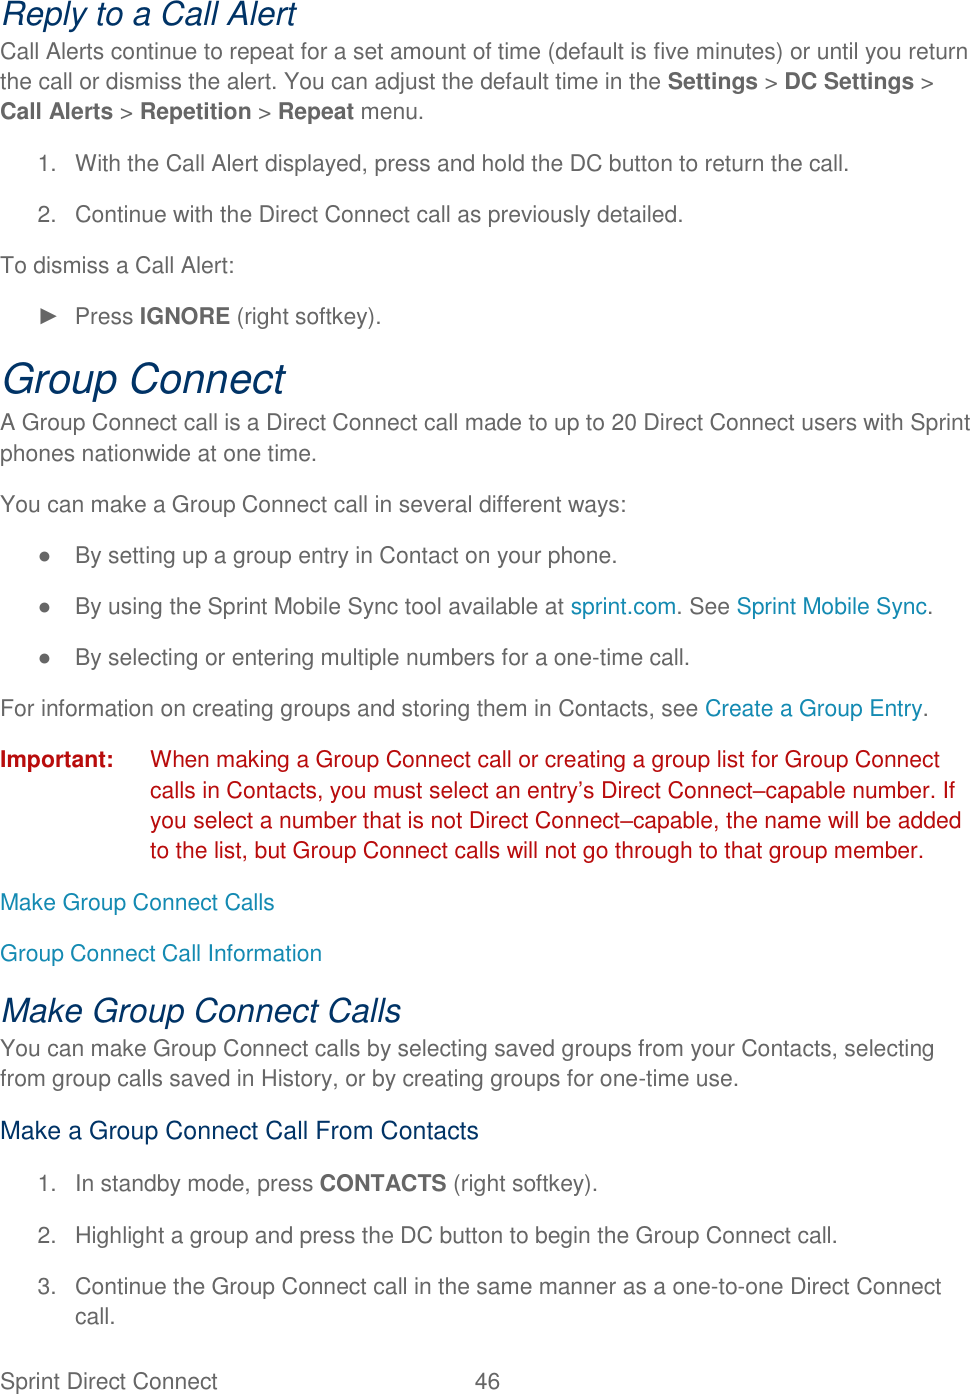  Sprint Direct Connect  46   Reply to a Call Alert Call Alerts continue to repeat for a set amount of time (default is five minutes) or until you return the call or dismiss the alert. You can adjust the default time in the Settings &gt; DC Settings &gt; Call Alerts &gt; Repetition &gt; Repeat menu. 1.  With the Call Alert displayed, press and hold the DC button to return the call. 2.  Continue with the Direct Connect call as previously detailed. To dismiss a Call Alert: ►  Press IGNORE (right softkey). Group Connect A Group Connect call is a Direct Connect call made to up to 20 Direct Connect users with Sprint phones nationwide at one time. You can make a Group Connect call in several different ways: ●  By setting up a group entry in Contact on your phone. ●  By using the Sprint Mobile Sync tool available at sprint.com. See Sprint Mobile Sync. ●  By selecting or entering multiple numbers for a one-time call. For information on creating groups and storing them in Contacts, see Create a Group Entry. Important:  When making a Group Connect call or creating a group list for Group Connect calls in Contacts, you must select an entry‘s Direct Connect–capable number. If you select a number that is not Direct Connect–capable, the name will be added to the list, but Group Connect calls will not go through to that group member. Make Group Connect Calls Group Connect Call Information Make Group Connect Calls You can make Group Connect calls by selecting saved groups from your Contacts, selecting from group calls saved in History, or by creating groups for one-time use. Make a Group Connect Call From Contacts 1.  In standby mode, press CONTACTS (right softkey). 2.  Highlight a group and press the DC button to begin the Group Connect call. 3.  Continue the Group Connect call in the same manner as a one-to-one Direct Connect call. 